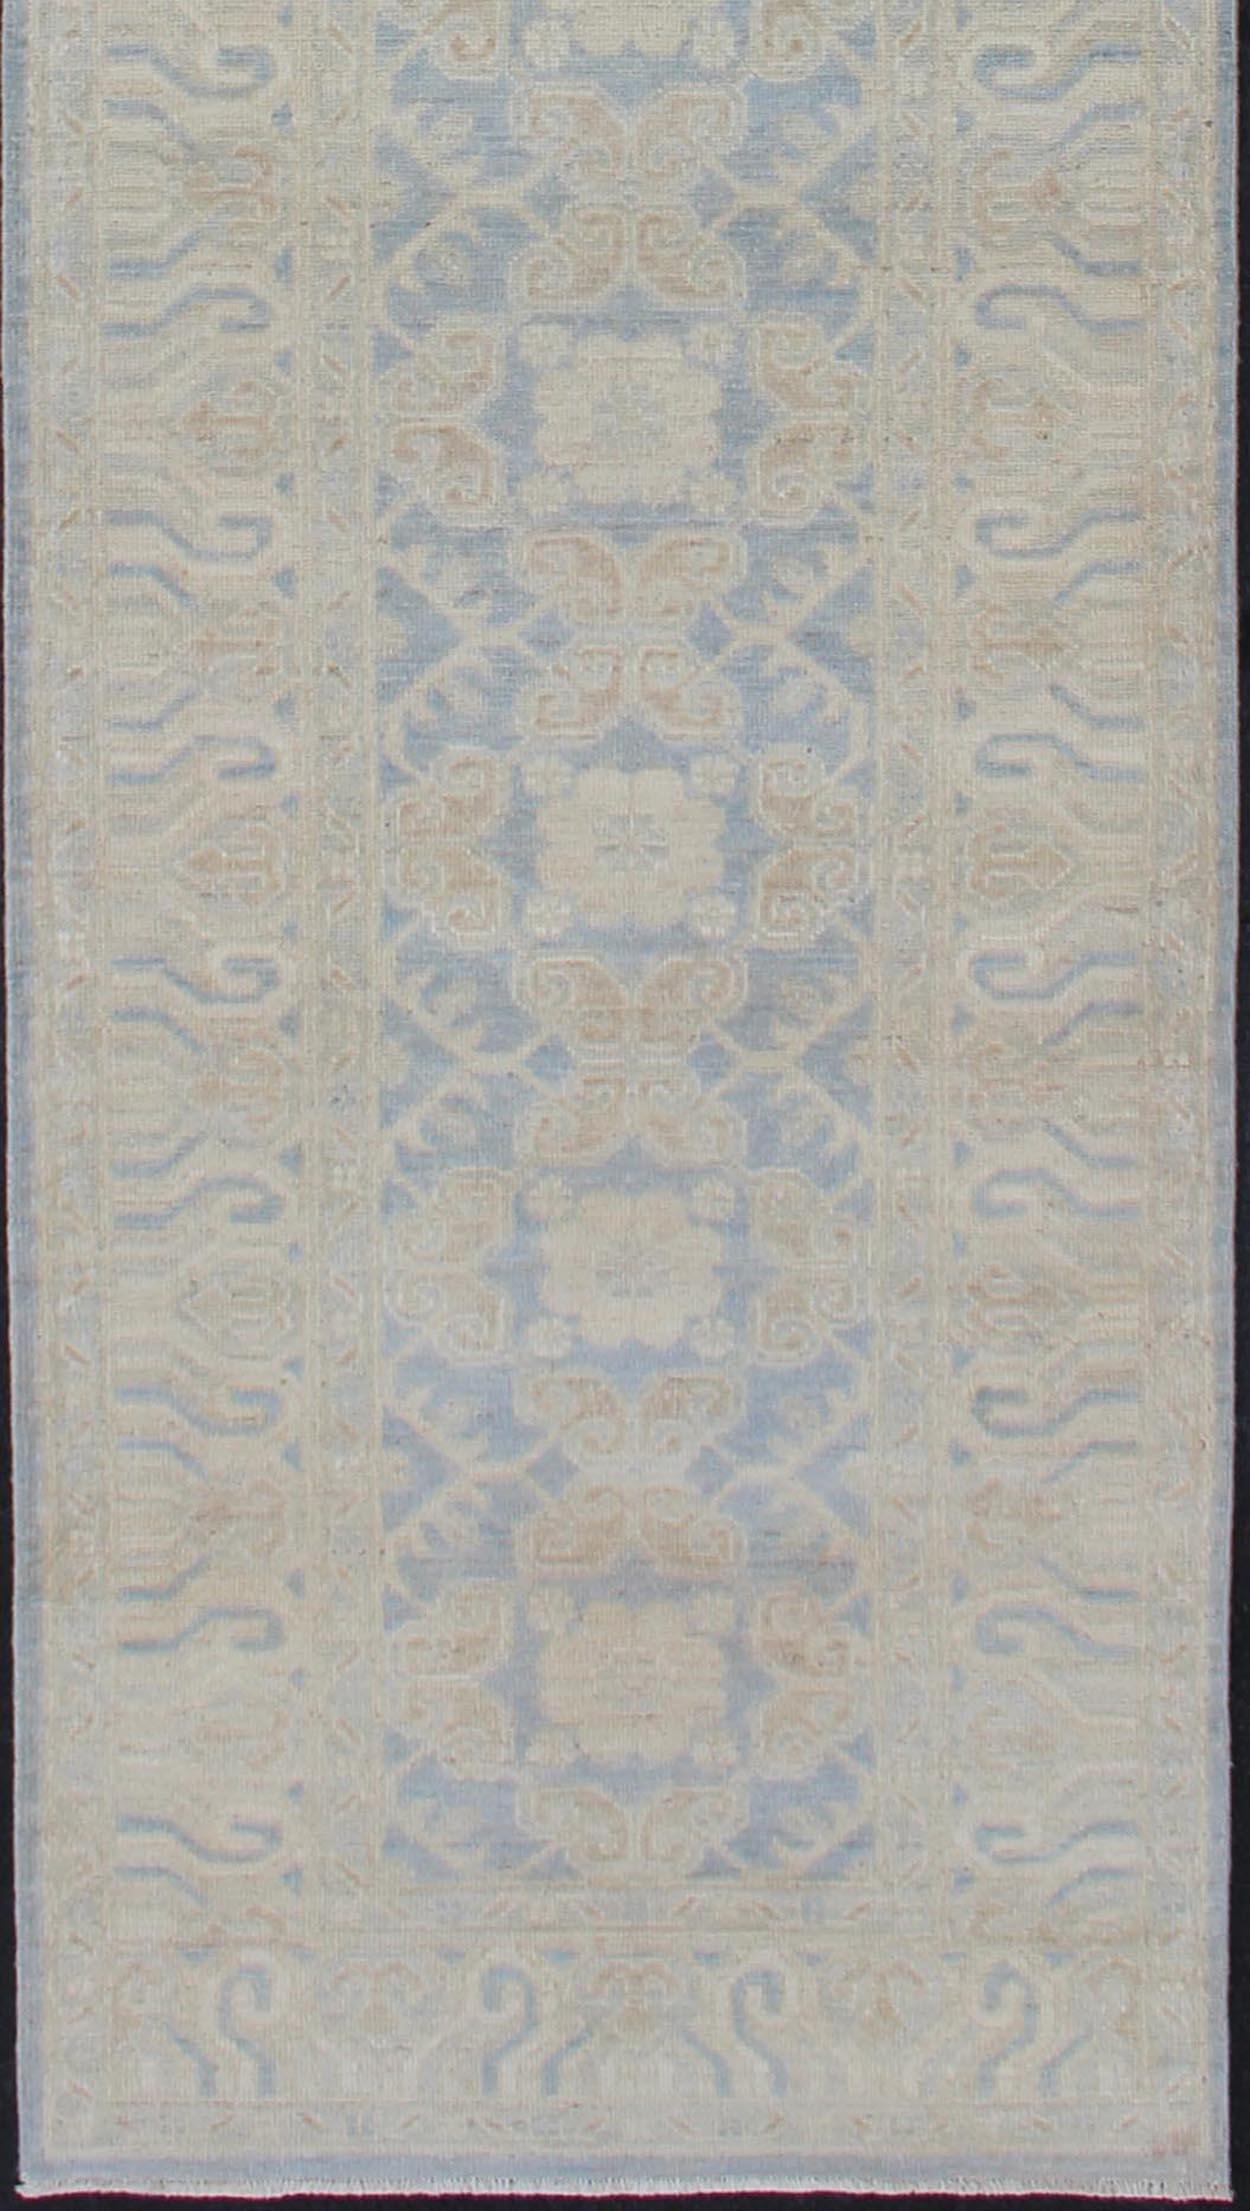 Hand-Knotted Afghan Khotan Runner with Geometric Design in Shades of Powder Blue and Tan For Sale